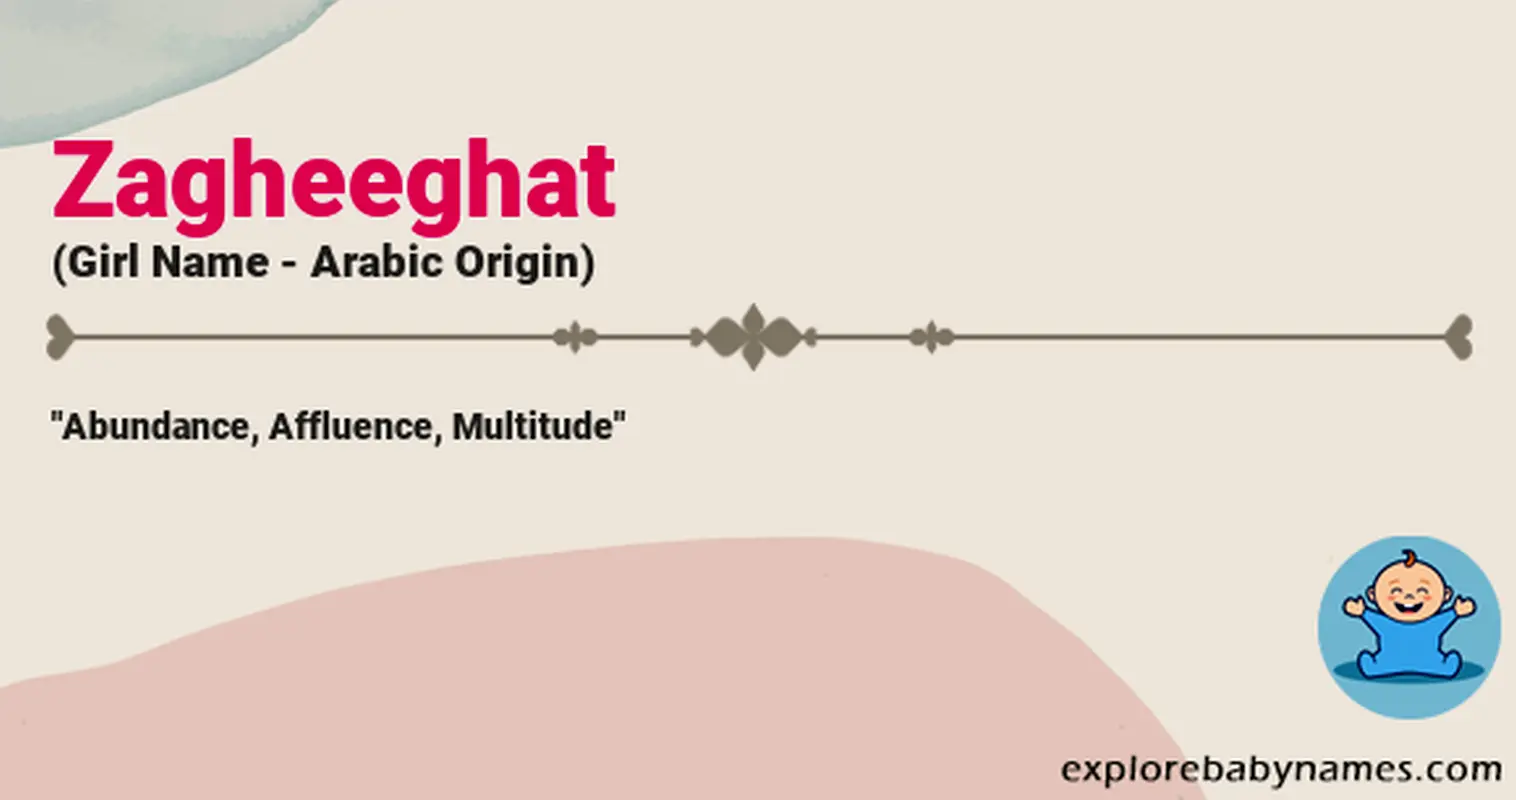 Meaning of Zagheeghat